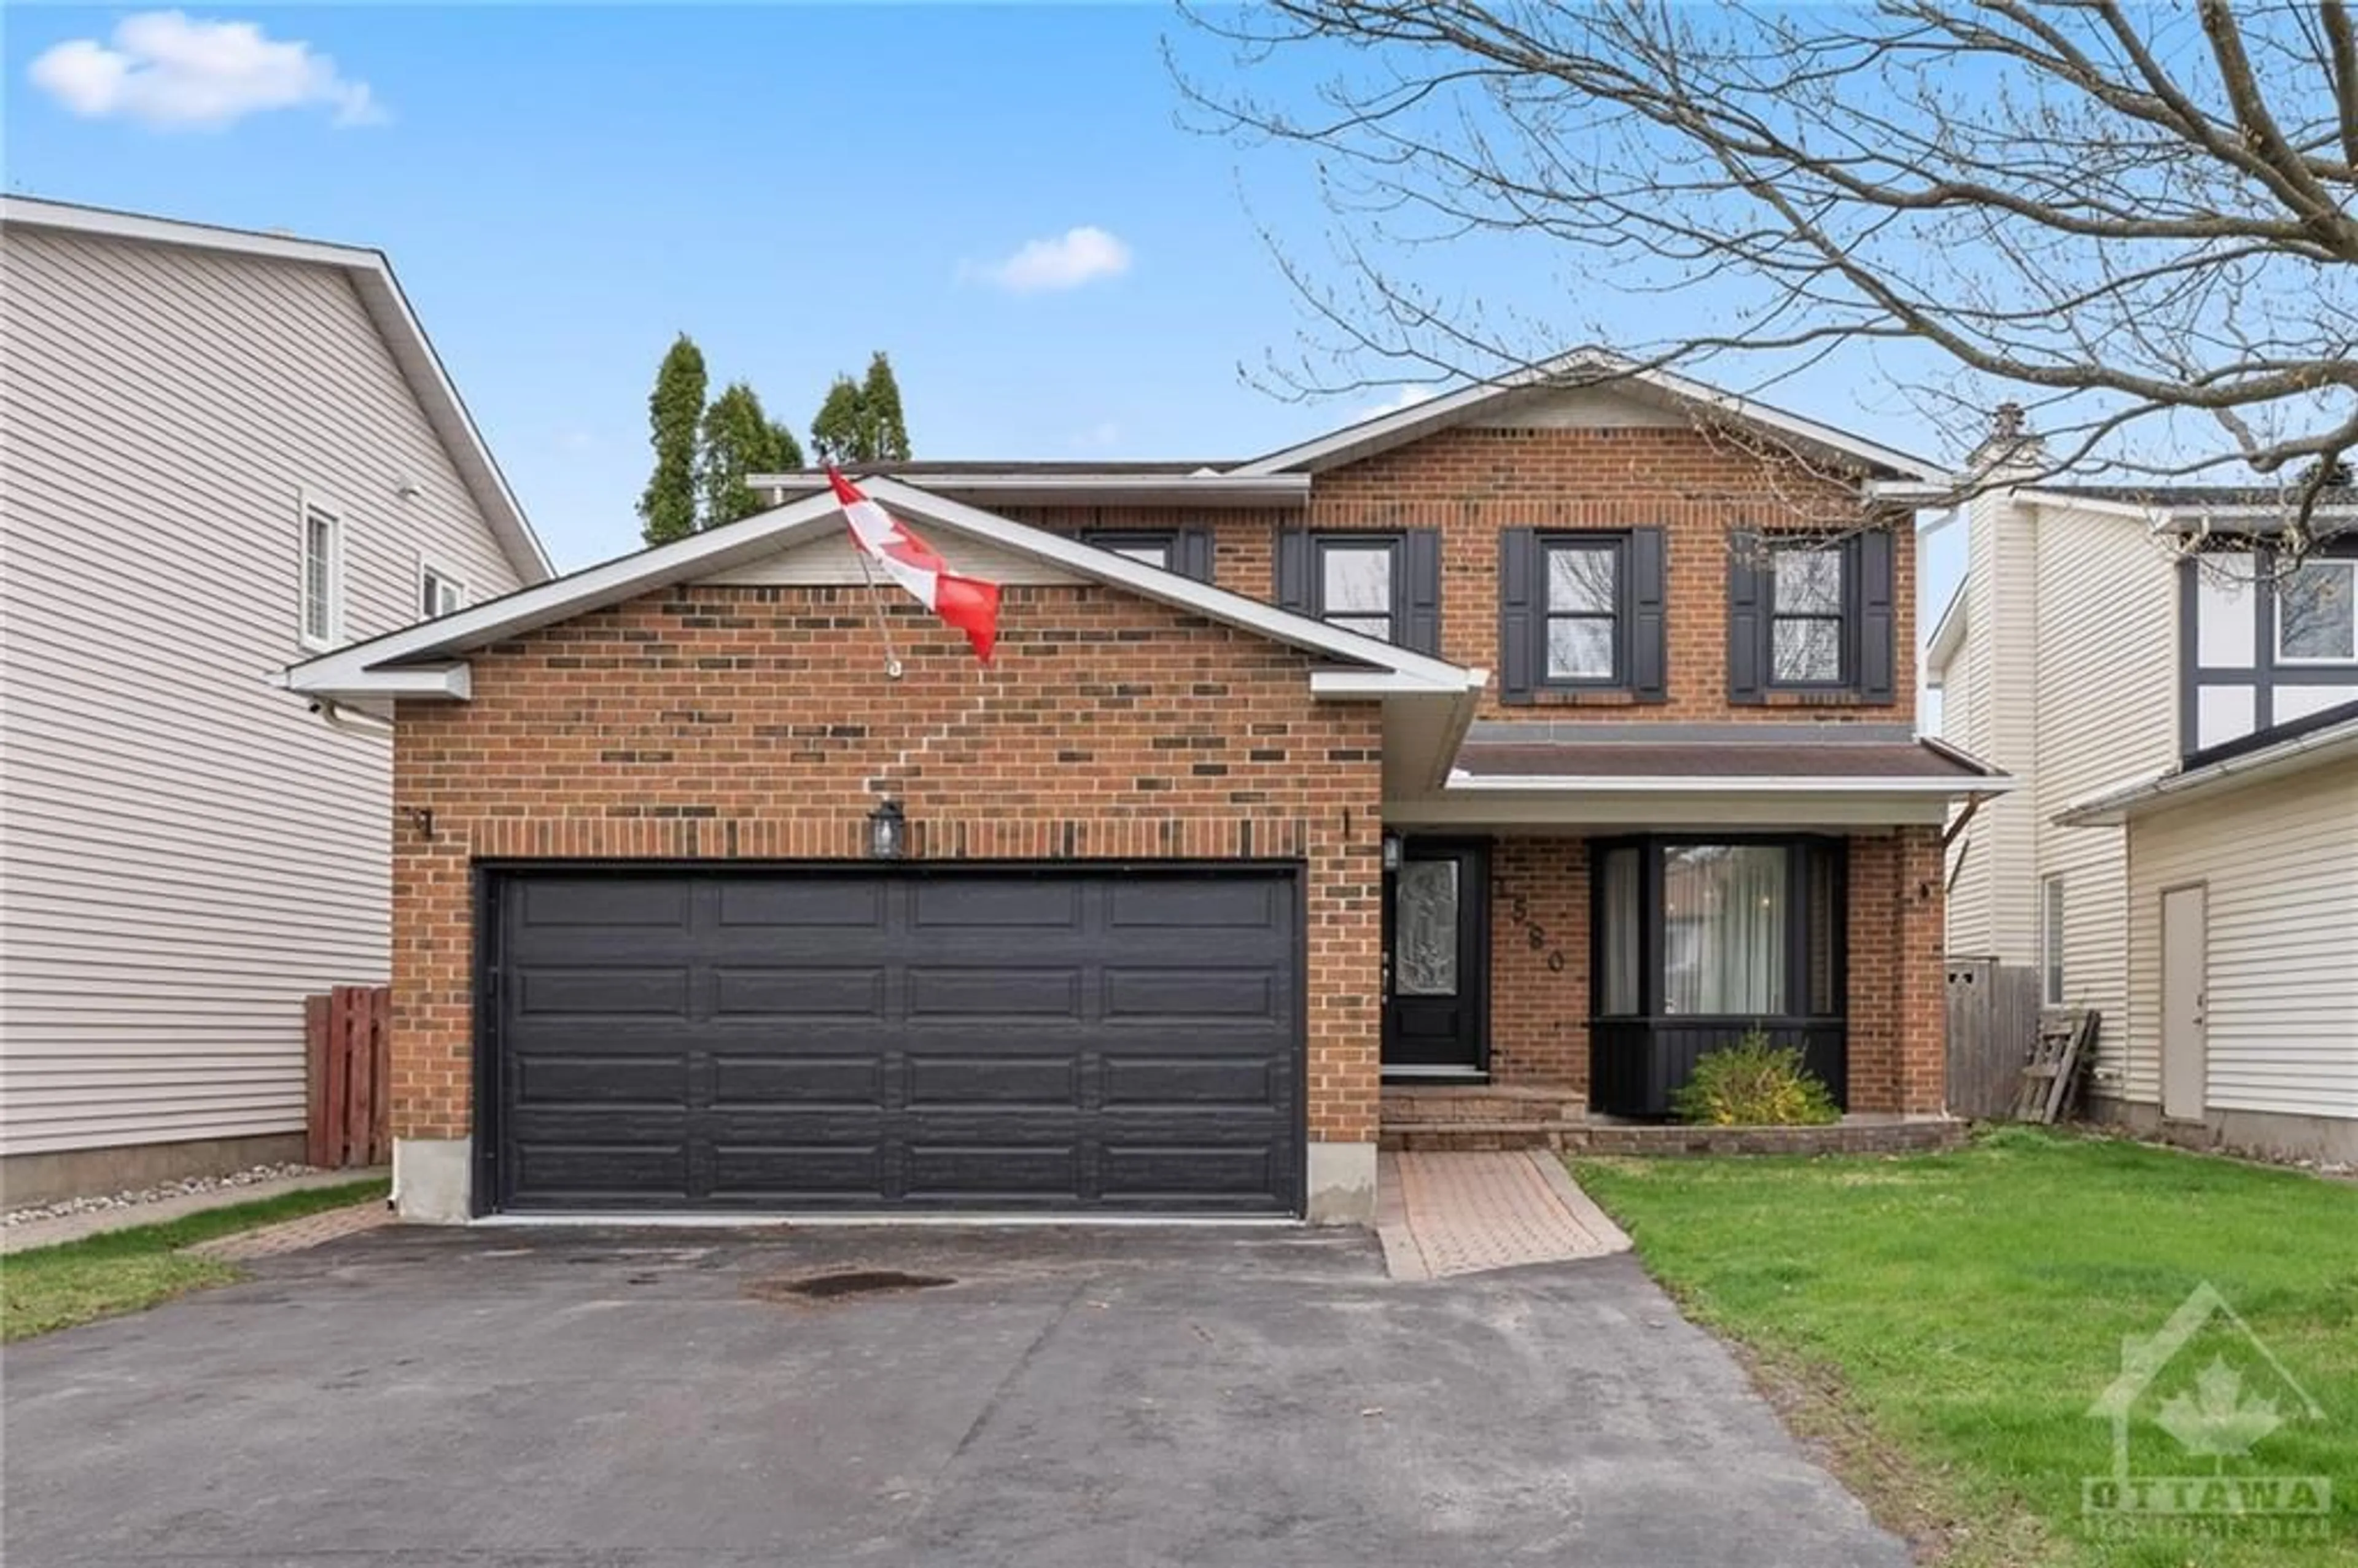 Home with brick exterior material for 1580 SUNVIEW Dr, Ottawa Ontario K1C 5A6